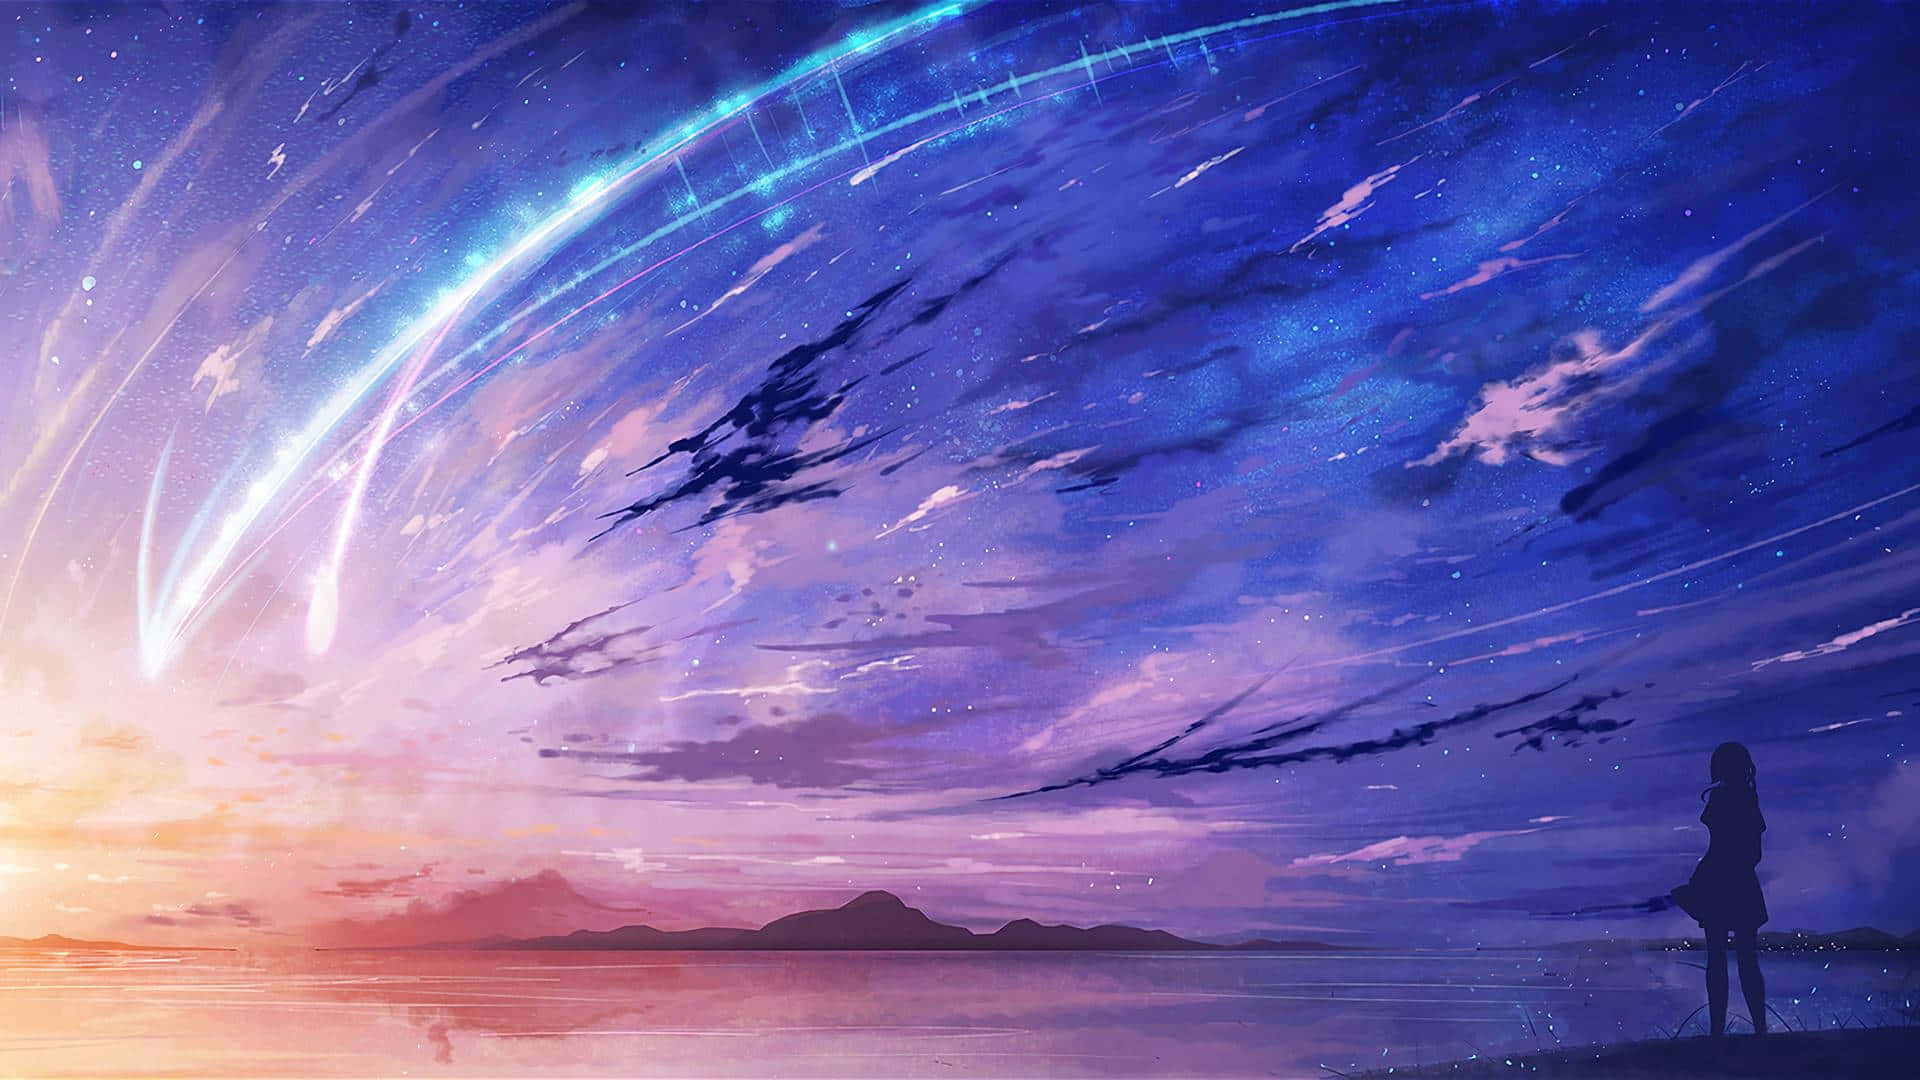 Some Fantastic Quality Anime Wallpapers for your Phone or PC - Tech Junkie